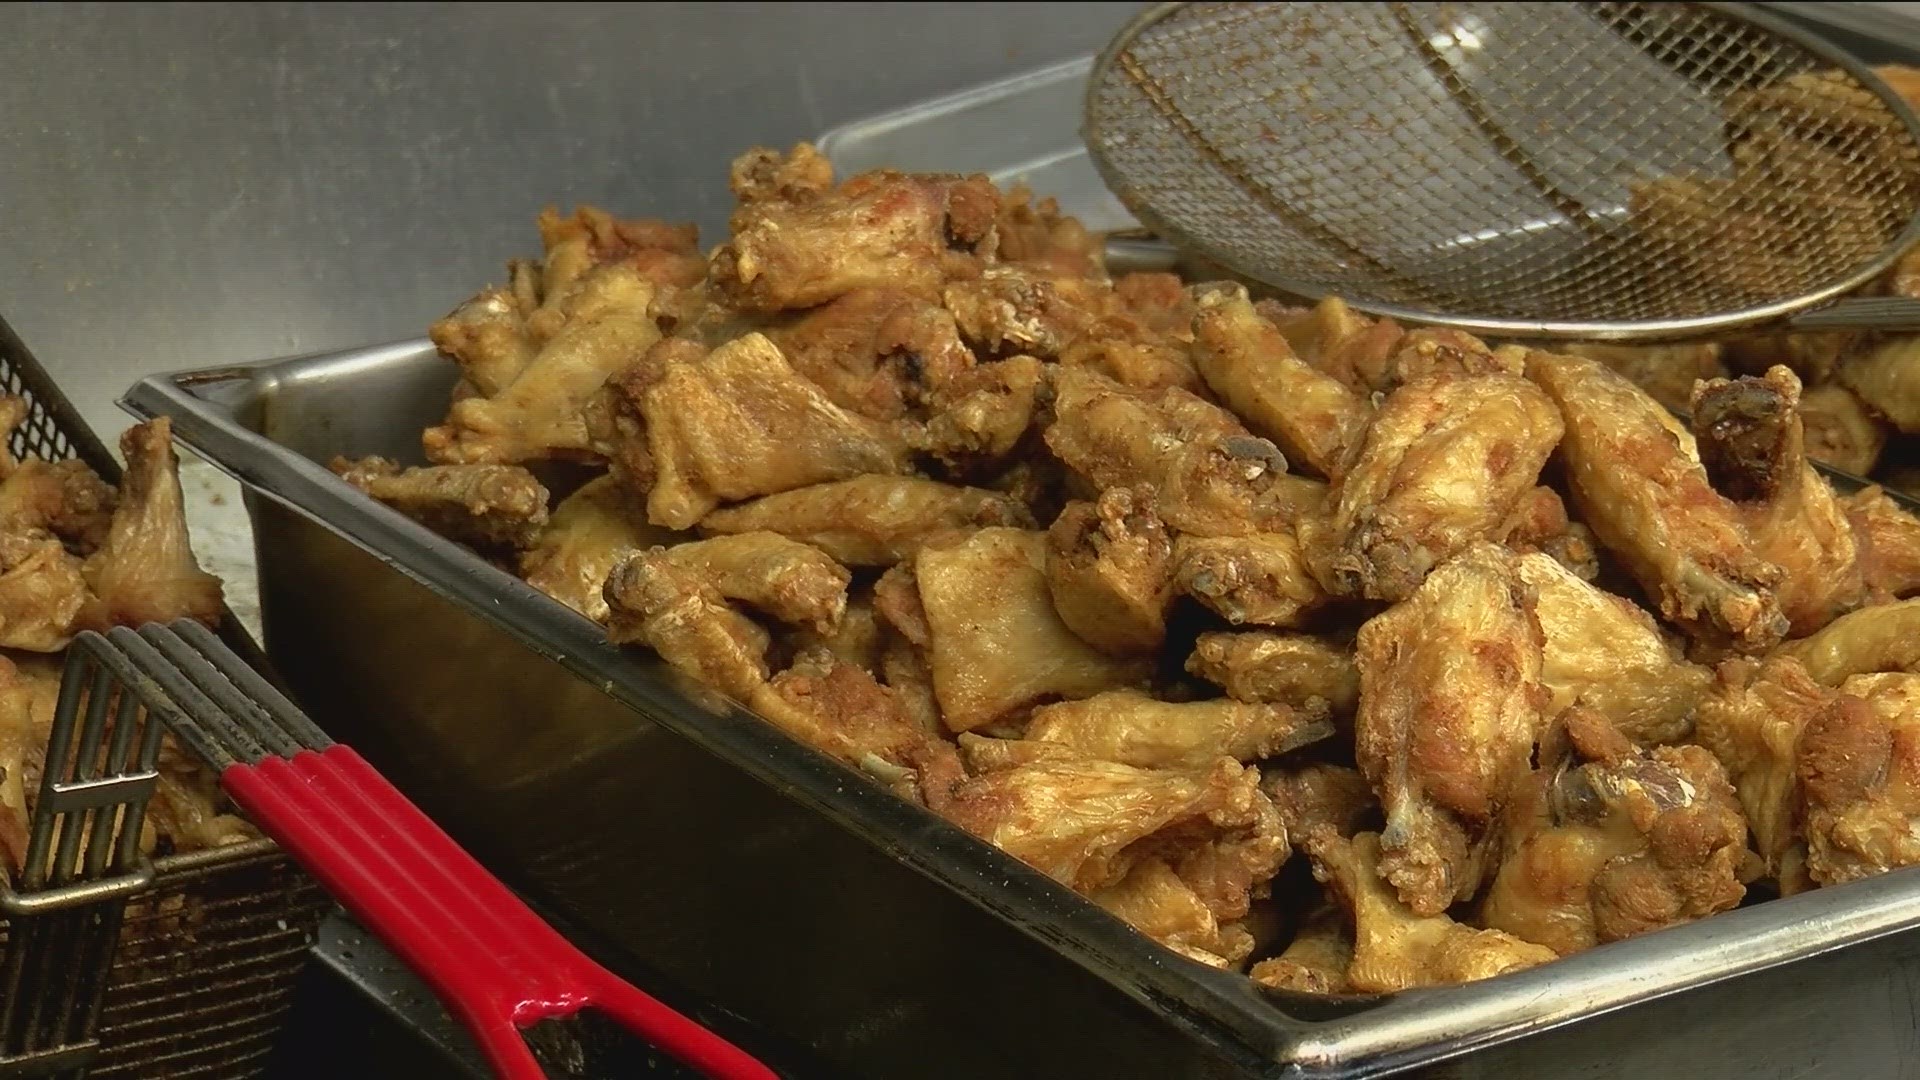 Local businesses were busy prepping plenty of wings and other foods for the big game on Sunday.